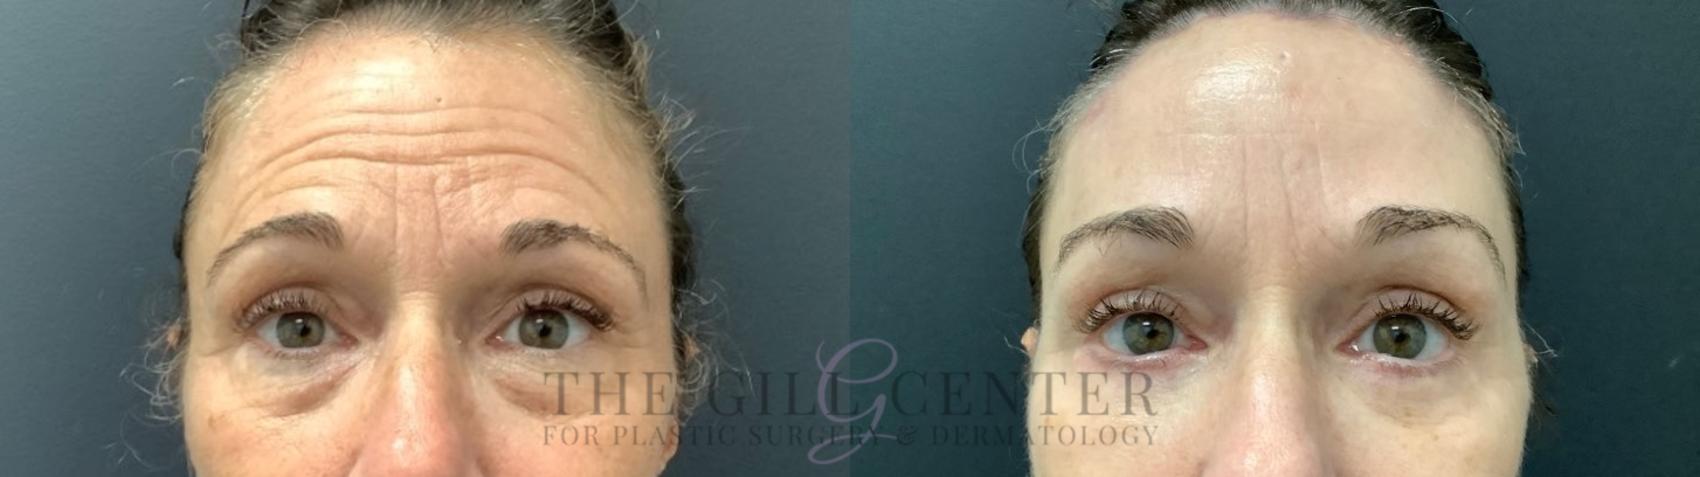 Eyelid Lift Case 527 Before & After Front | The Woodlands, TX | The Gill Center for Plastic Surgery and Dermatology